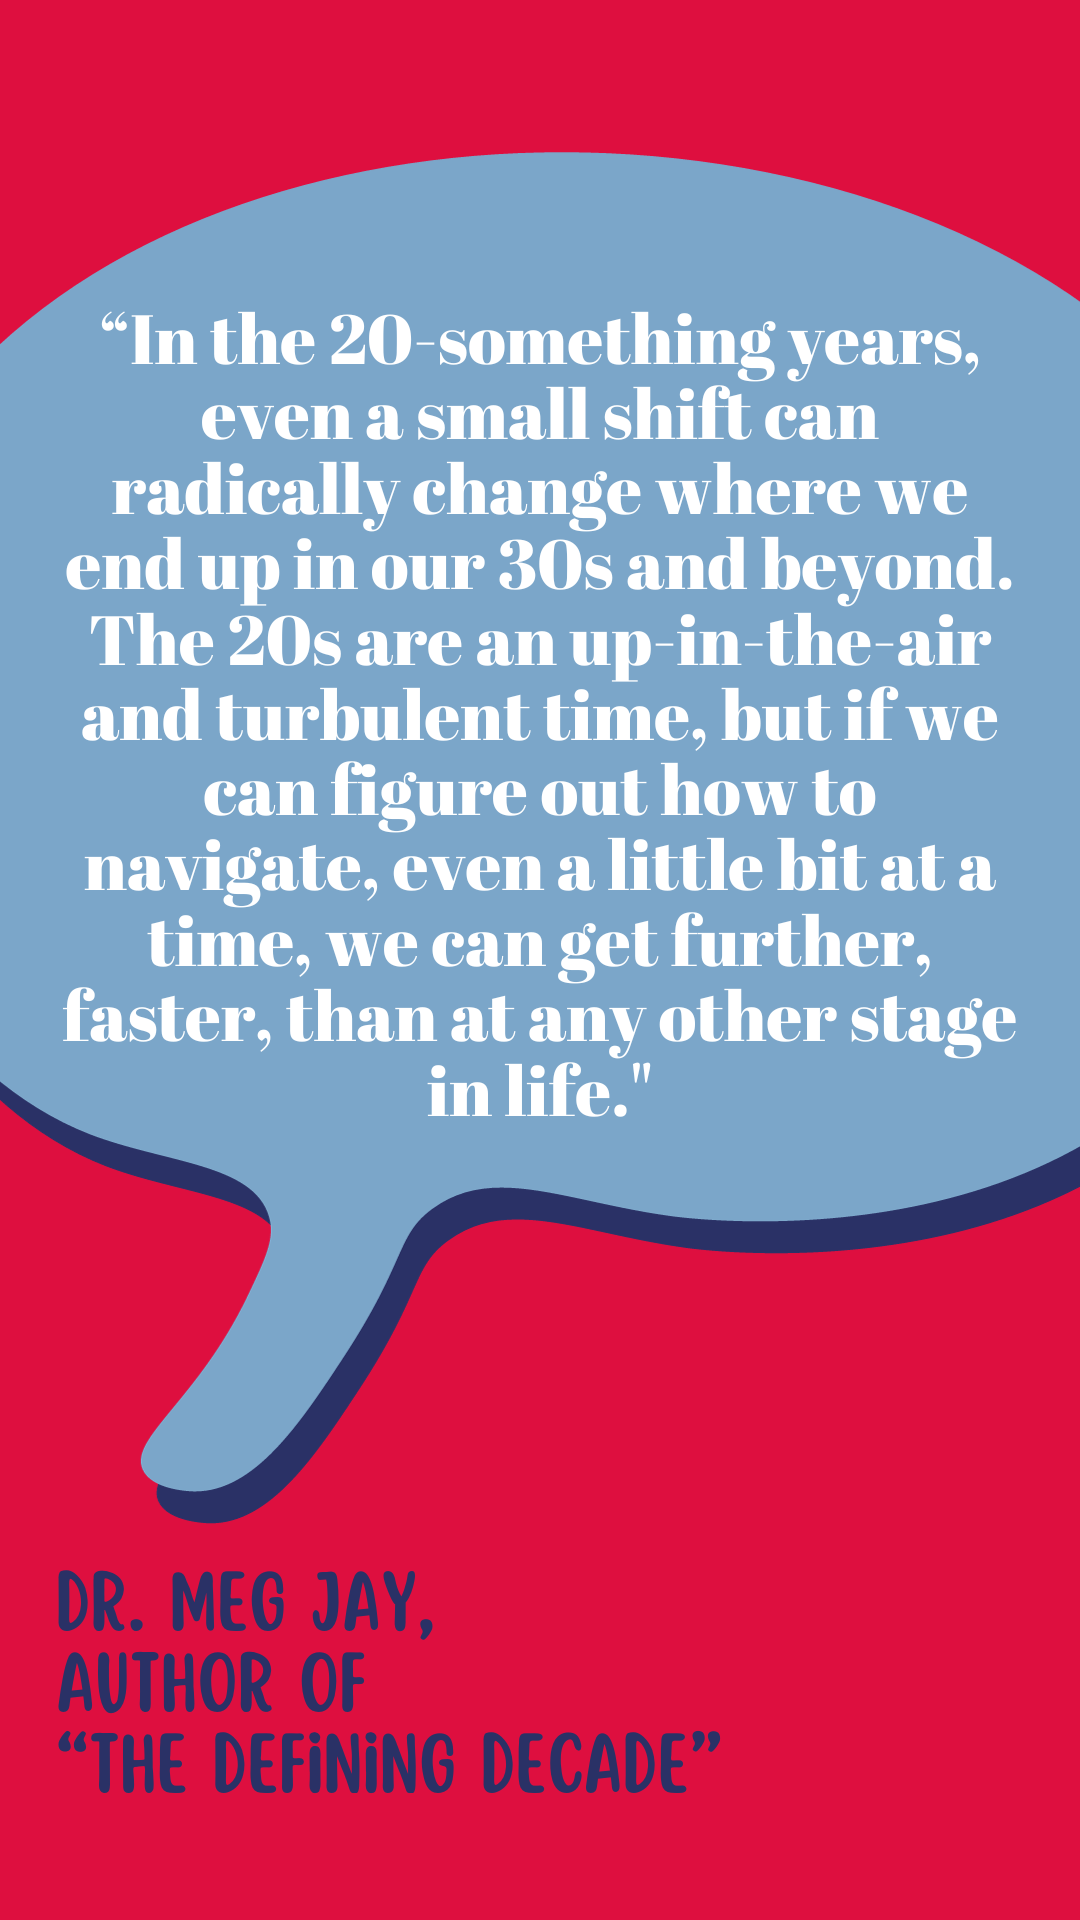 "In the twentysomething years, even a small shift can radically change where we end up in our thirties and beyond. The twenties are an up-in-the-air and turbulent time, but if we can figure out how to navigate, even a little bit at a time, we can get further, faster, than at any other stage in life," says Dr. Meg Jay, author of the book The Defining Decade.